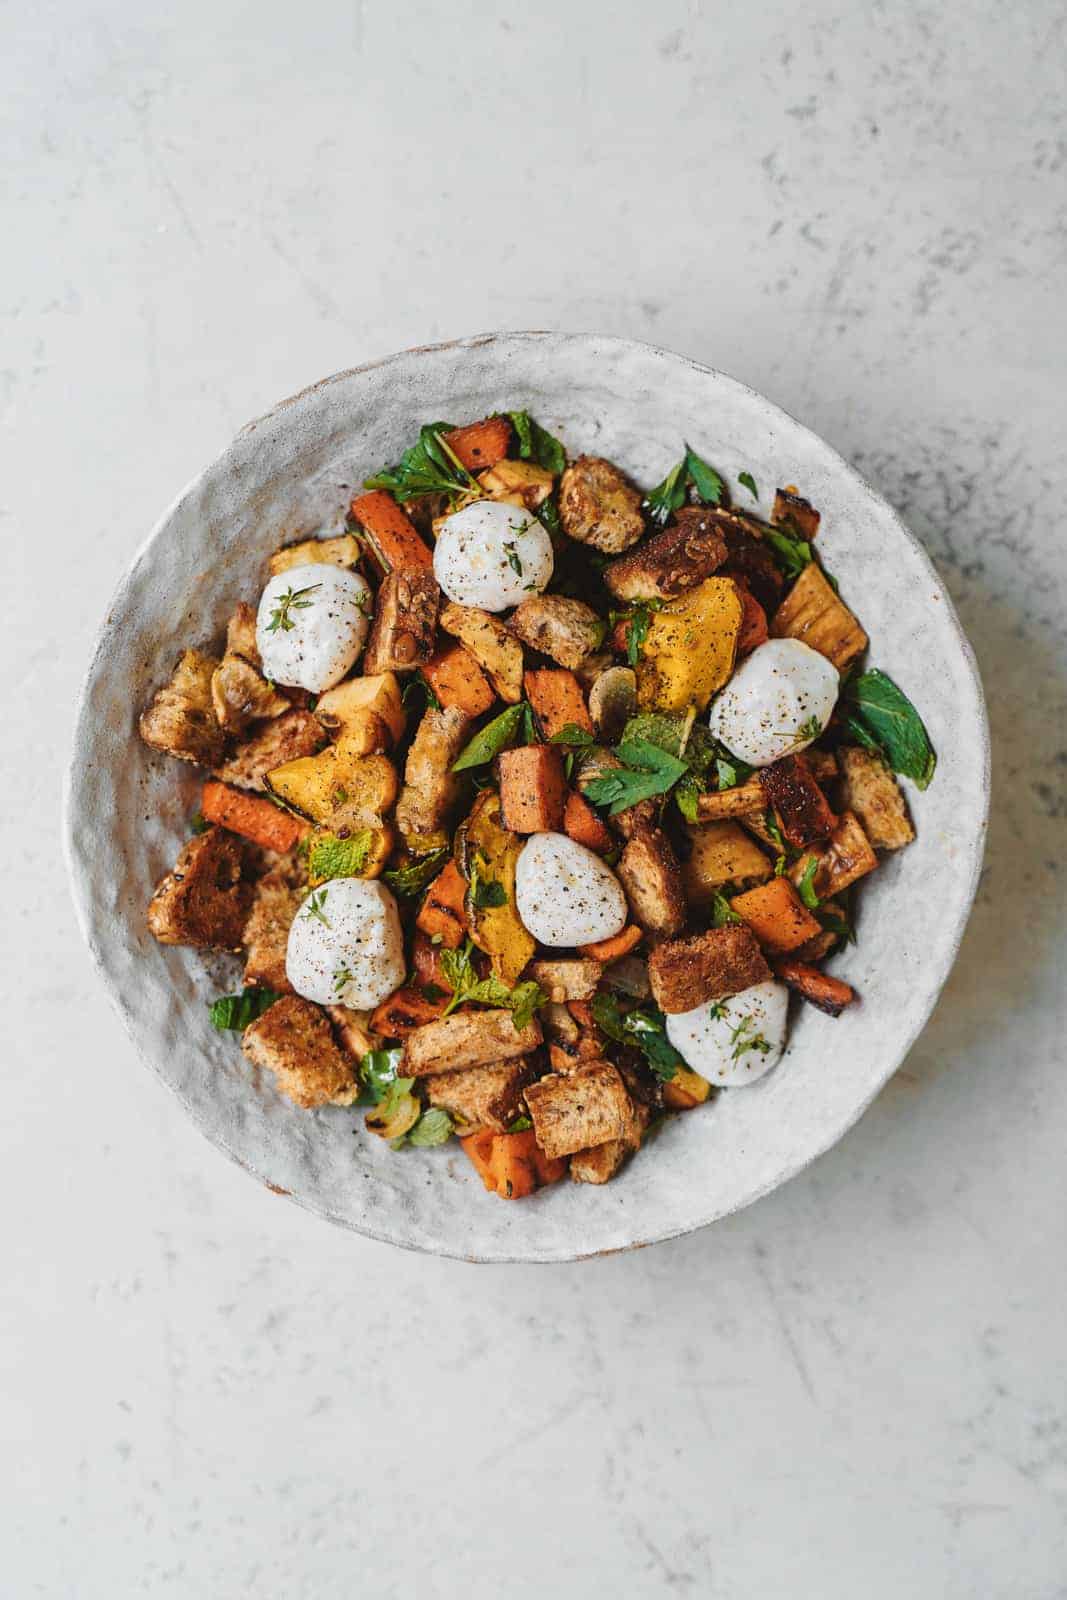 A bowl of Vegan Vegetable Panzanella Salad on a white table.